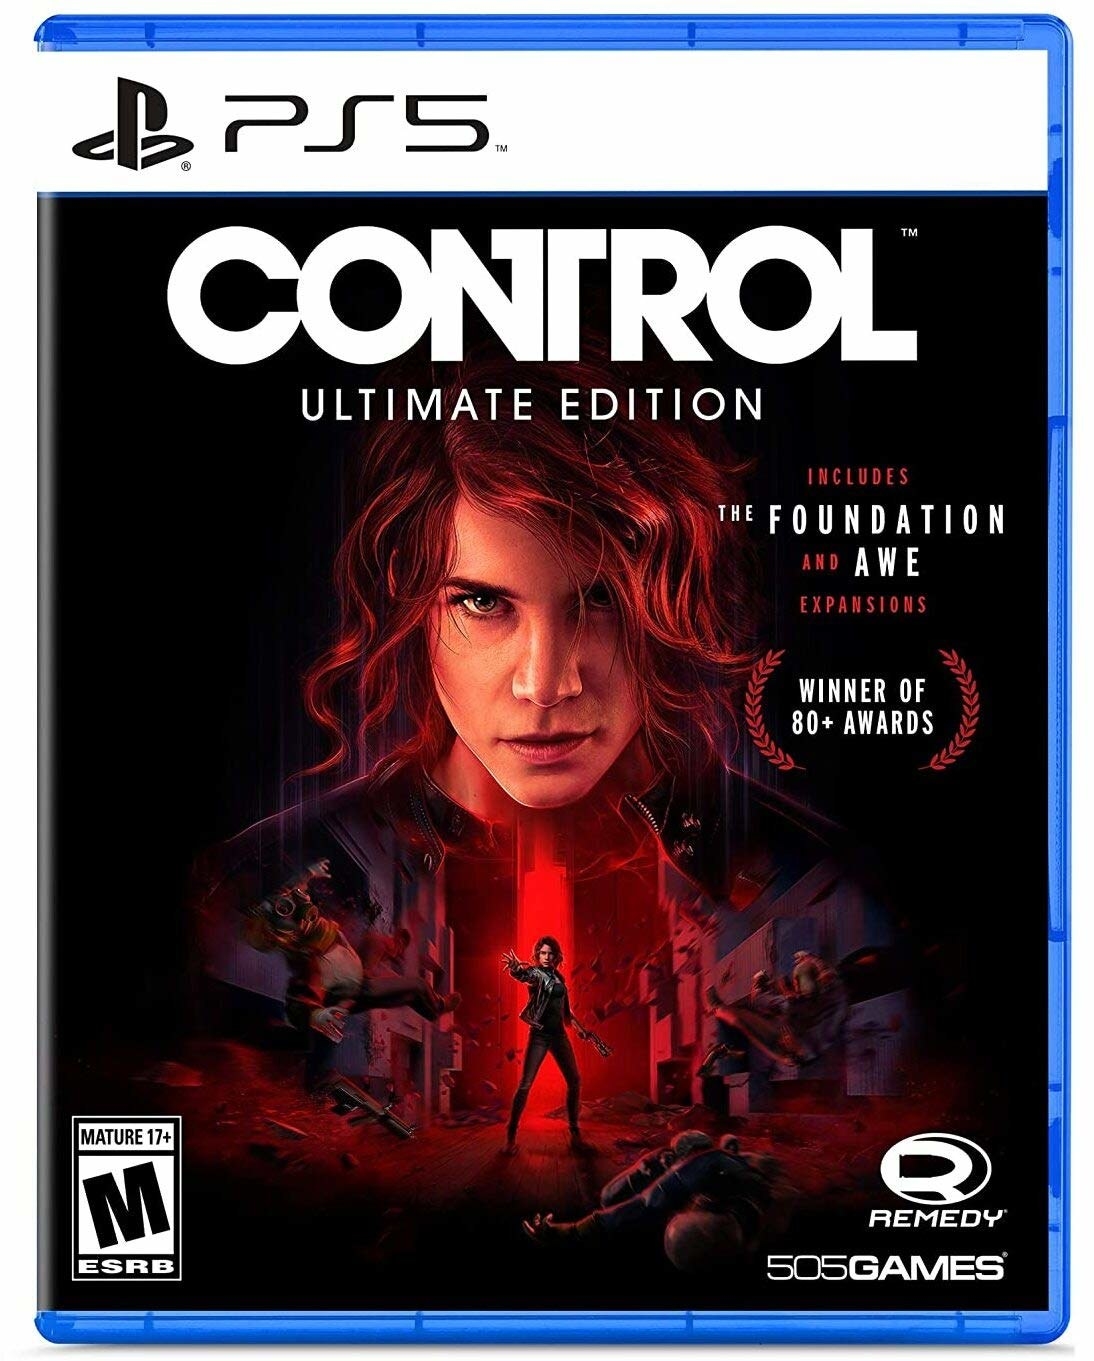 The game case for the ps5 edition of Control